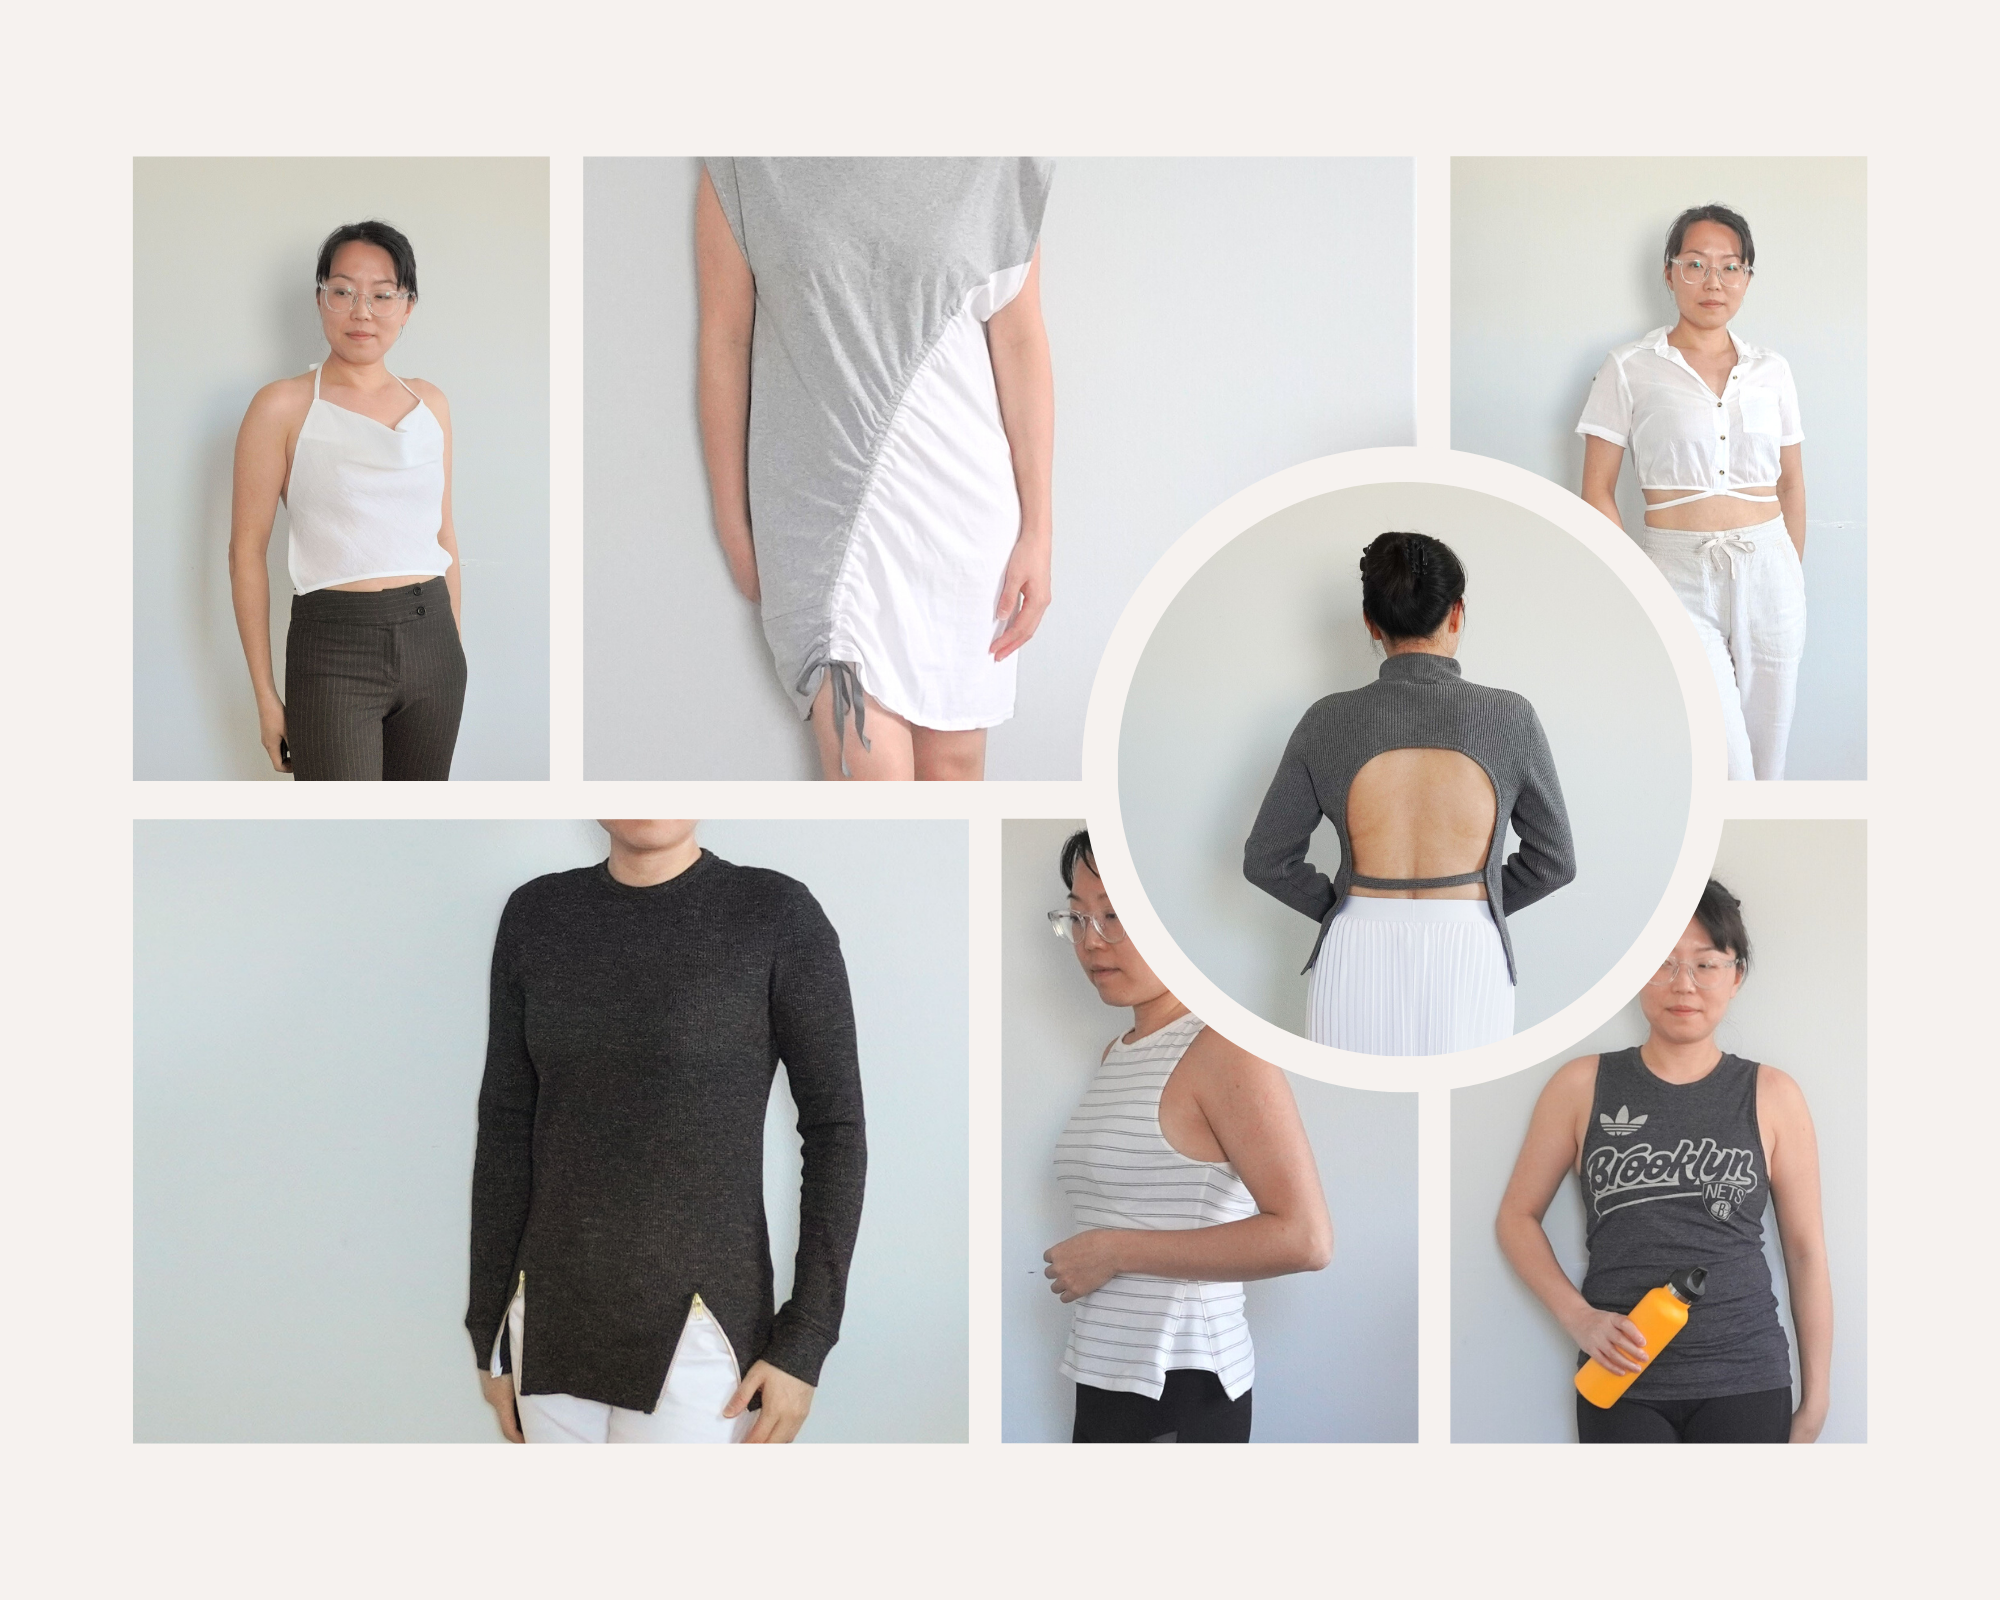 How to Refashion a Too-Small Shirt: 7 Different Methods — Sabrina